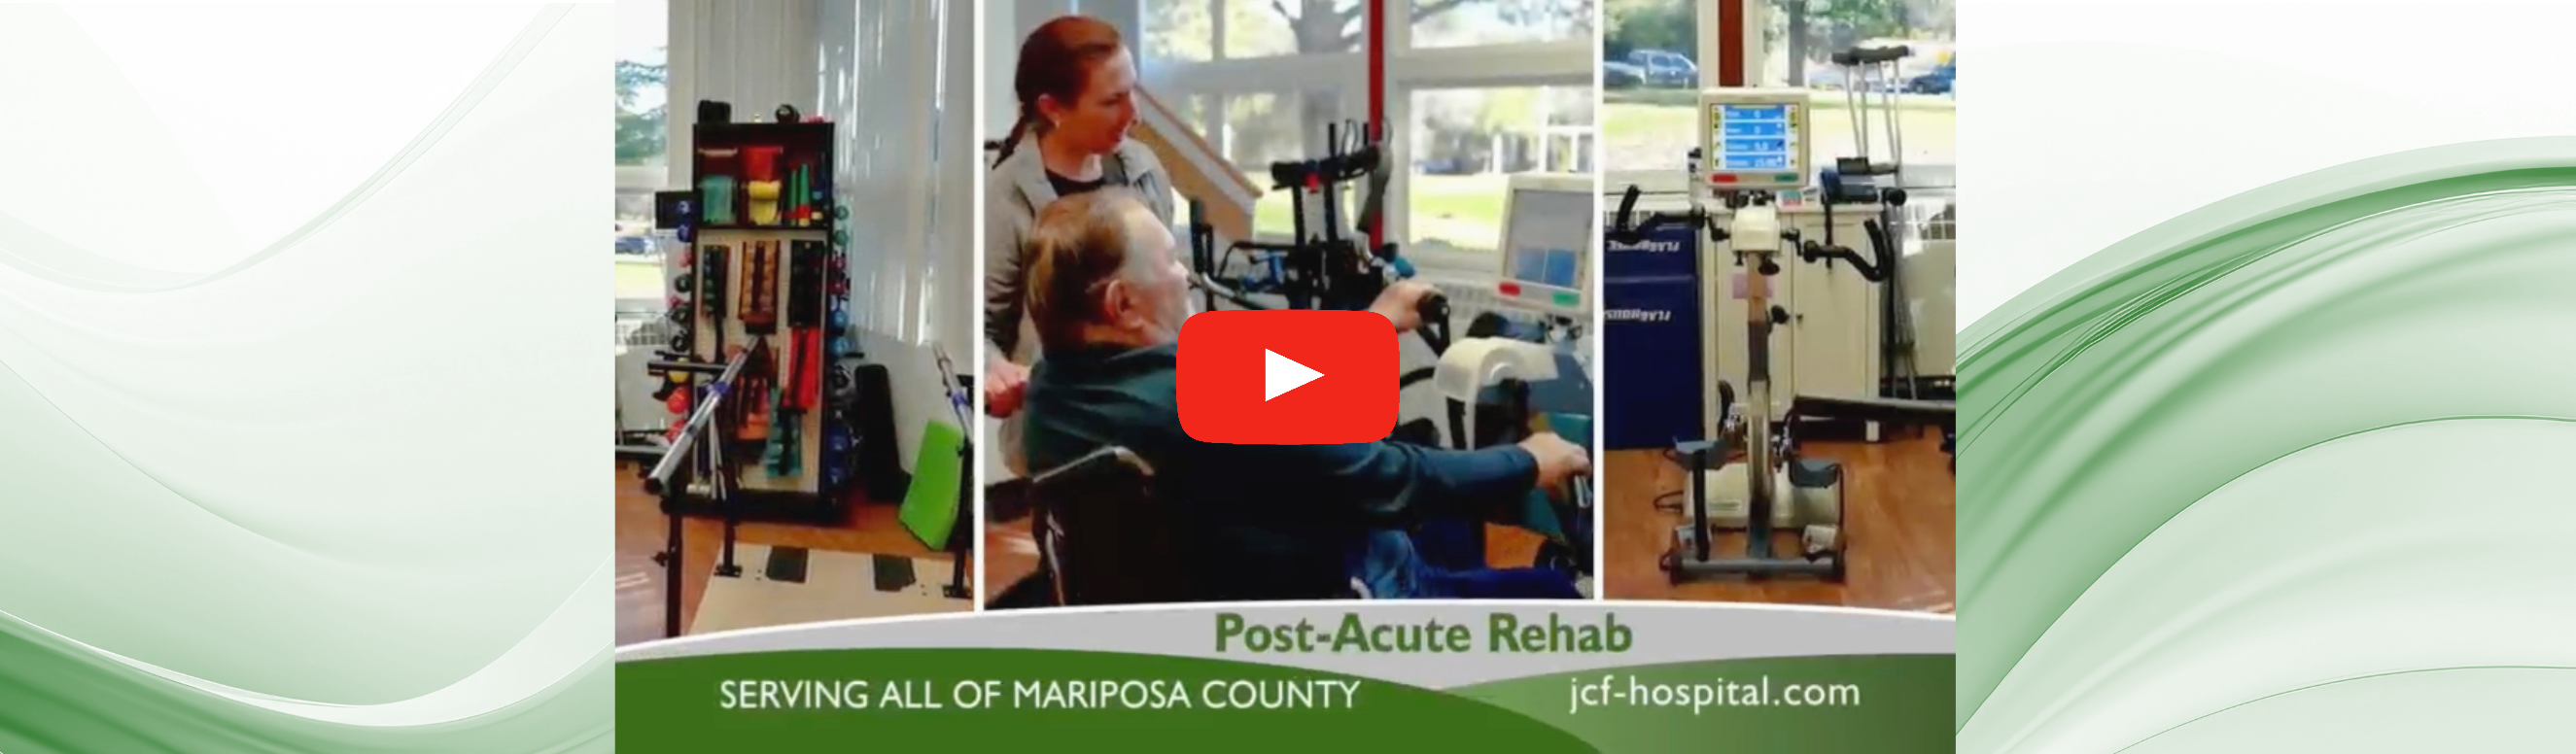 Click here to for our commercial about our Post-Acute Rehab program.